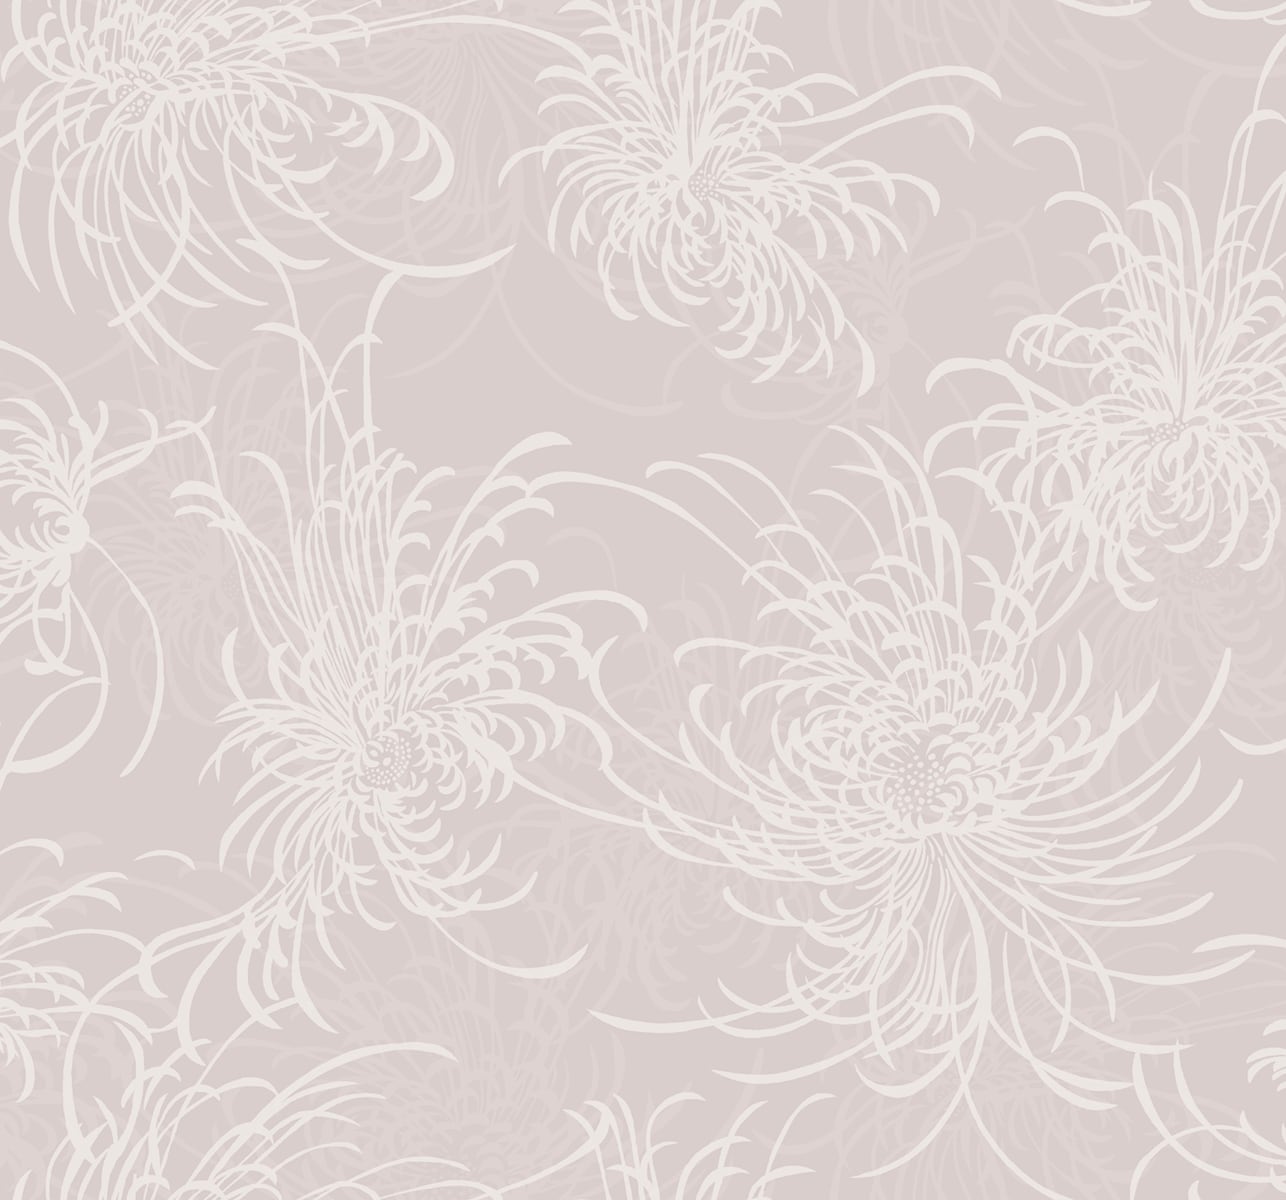 Seabrook Designs AW71501 Casa Blanca 2 Noell Floral  Wallpaper Blush Glitter and Off-White